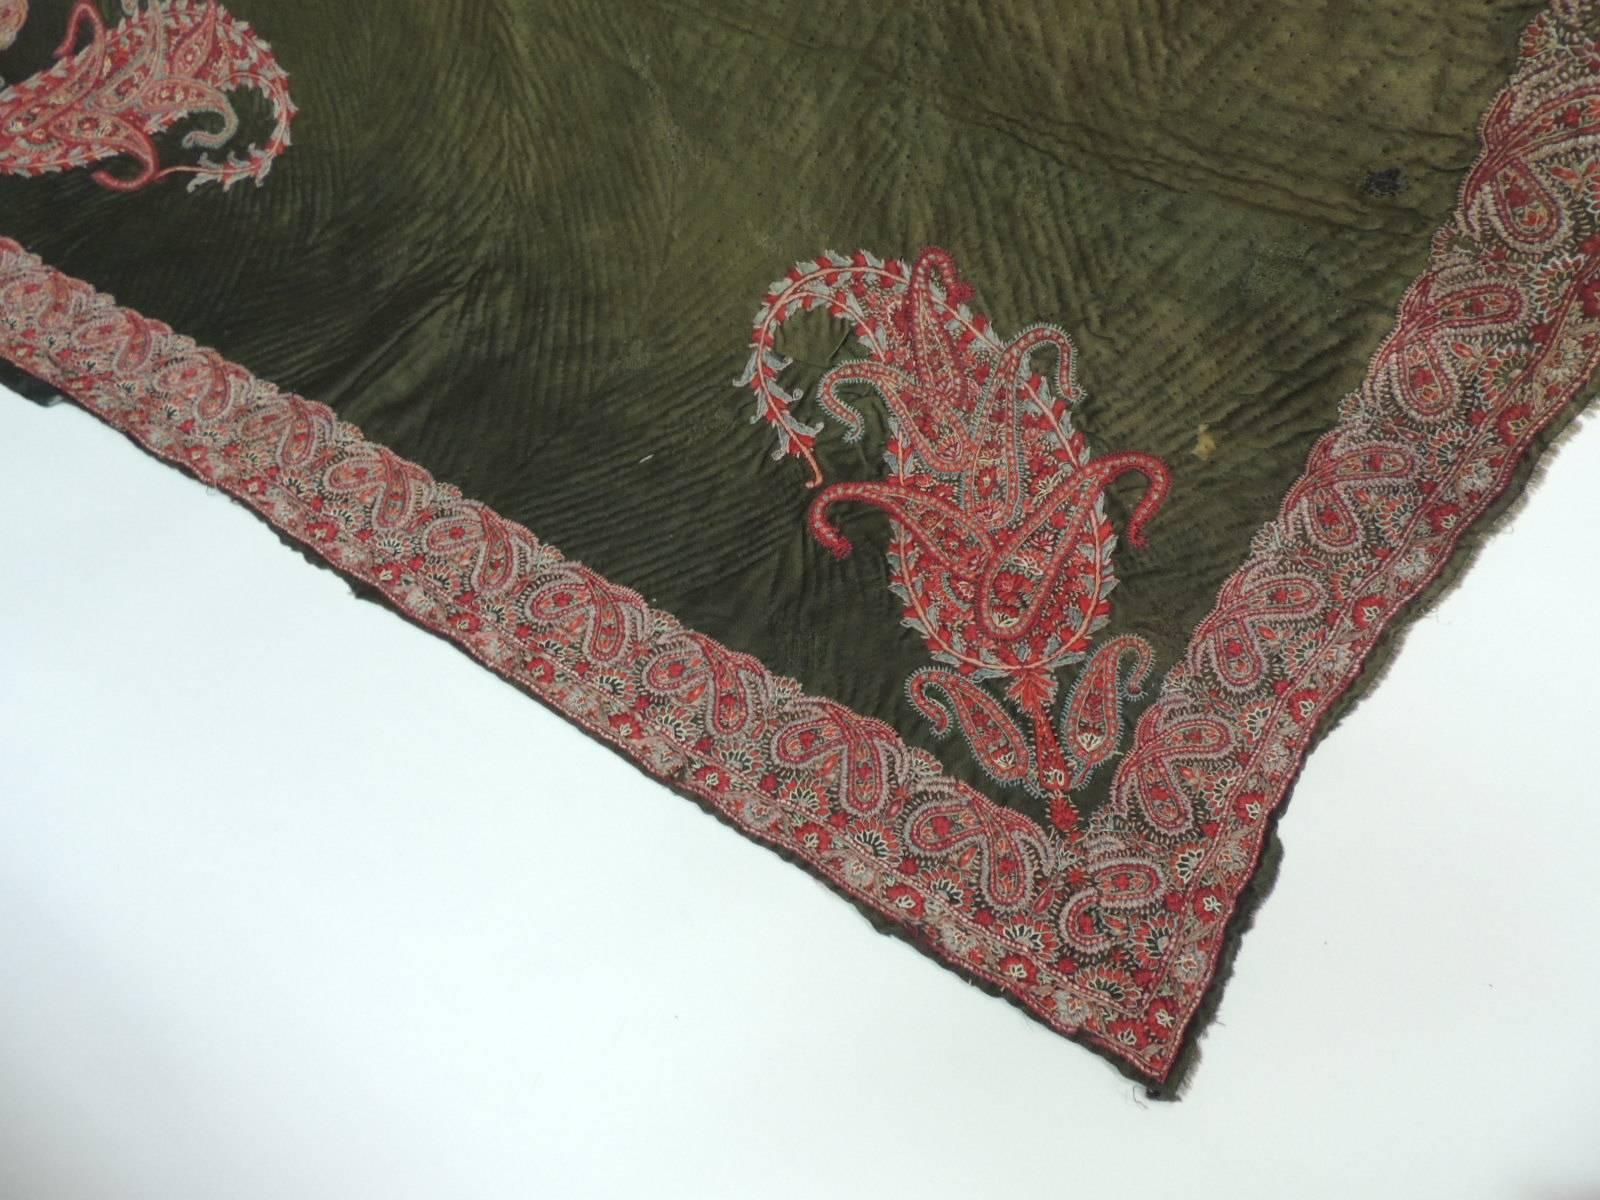 Antique Textiles Galleries:
18th century hunter green quilted center, creating a chevron pattern and embellished with an intricate red floral border and paisleys on all  four corners. The back has original sari silk print.
Note some fading due to